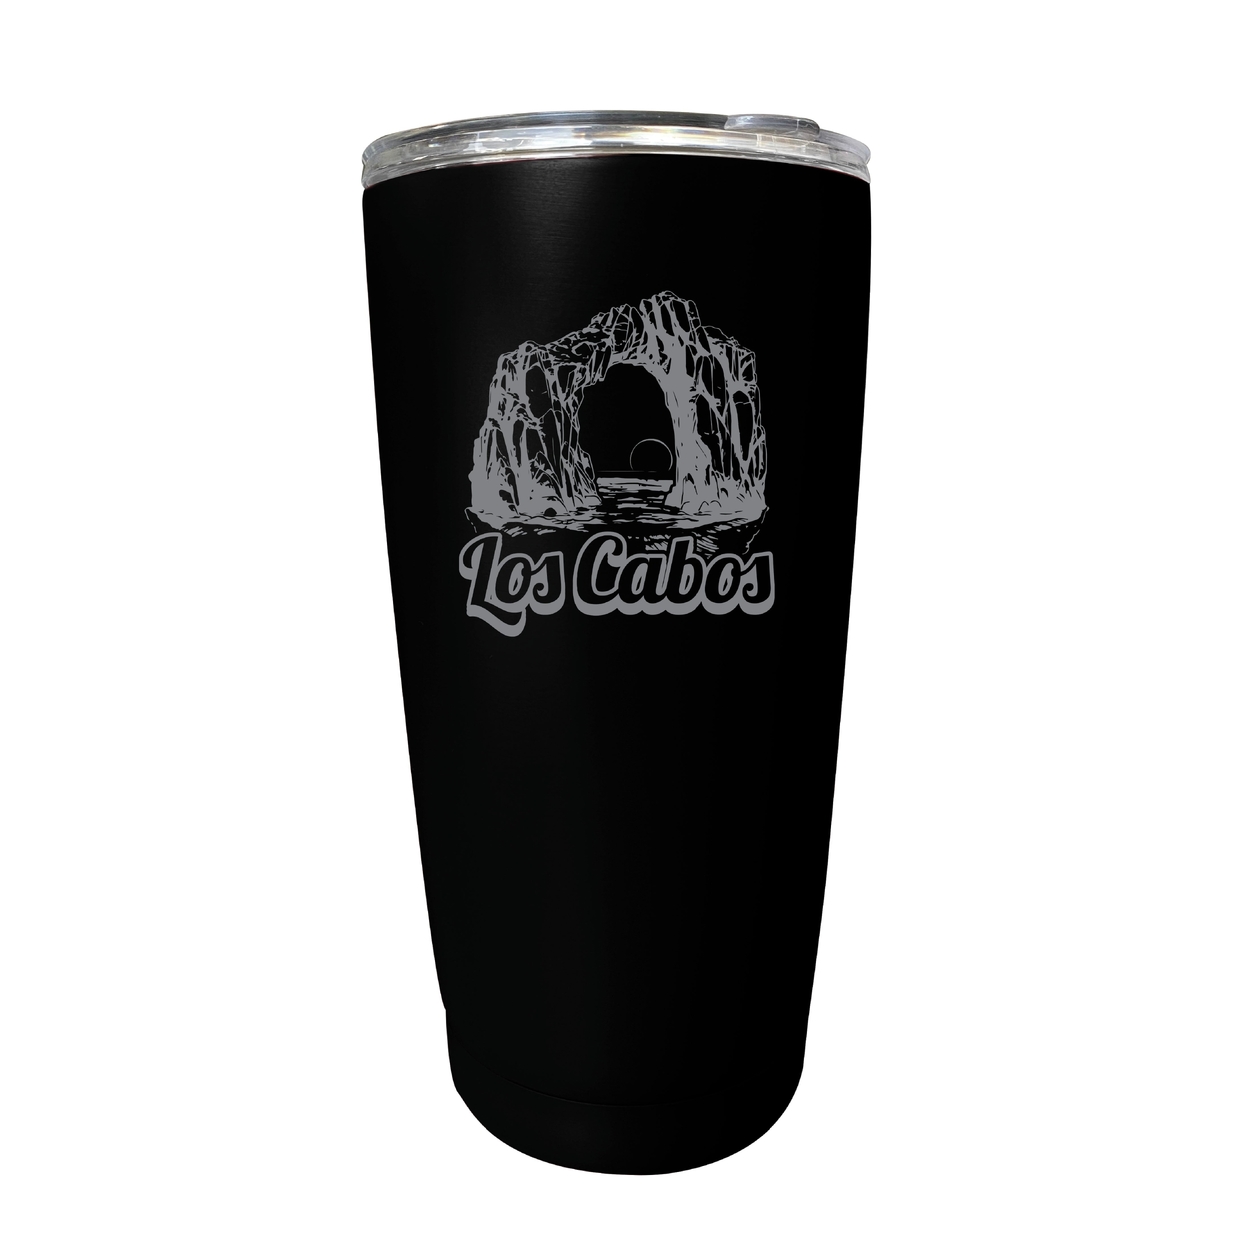 Los Cabos Mexico Souvenir 16 Oz Engraved Stainless Steel Insulated Tumbler - Black,,4-Pack